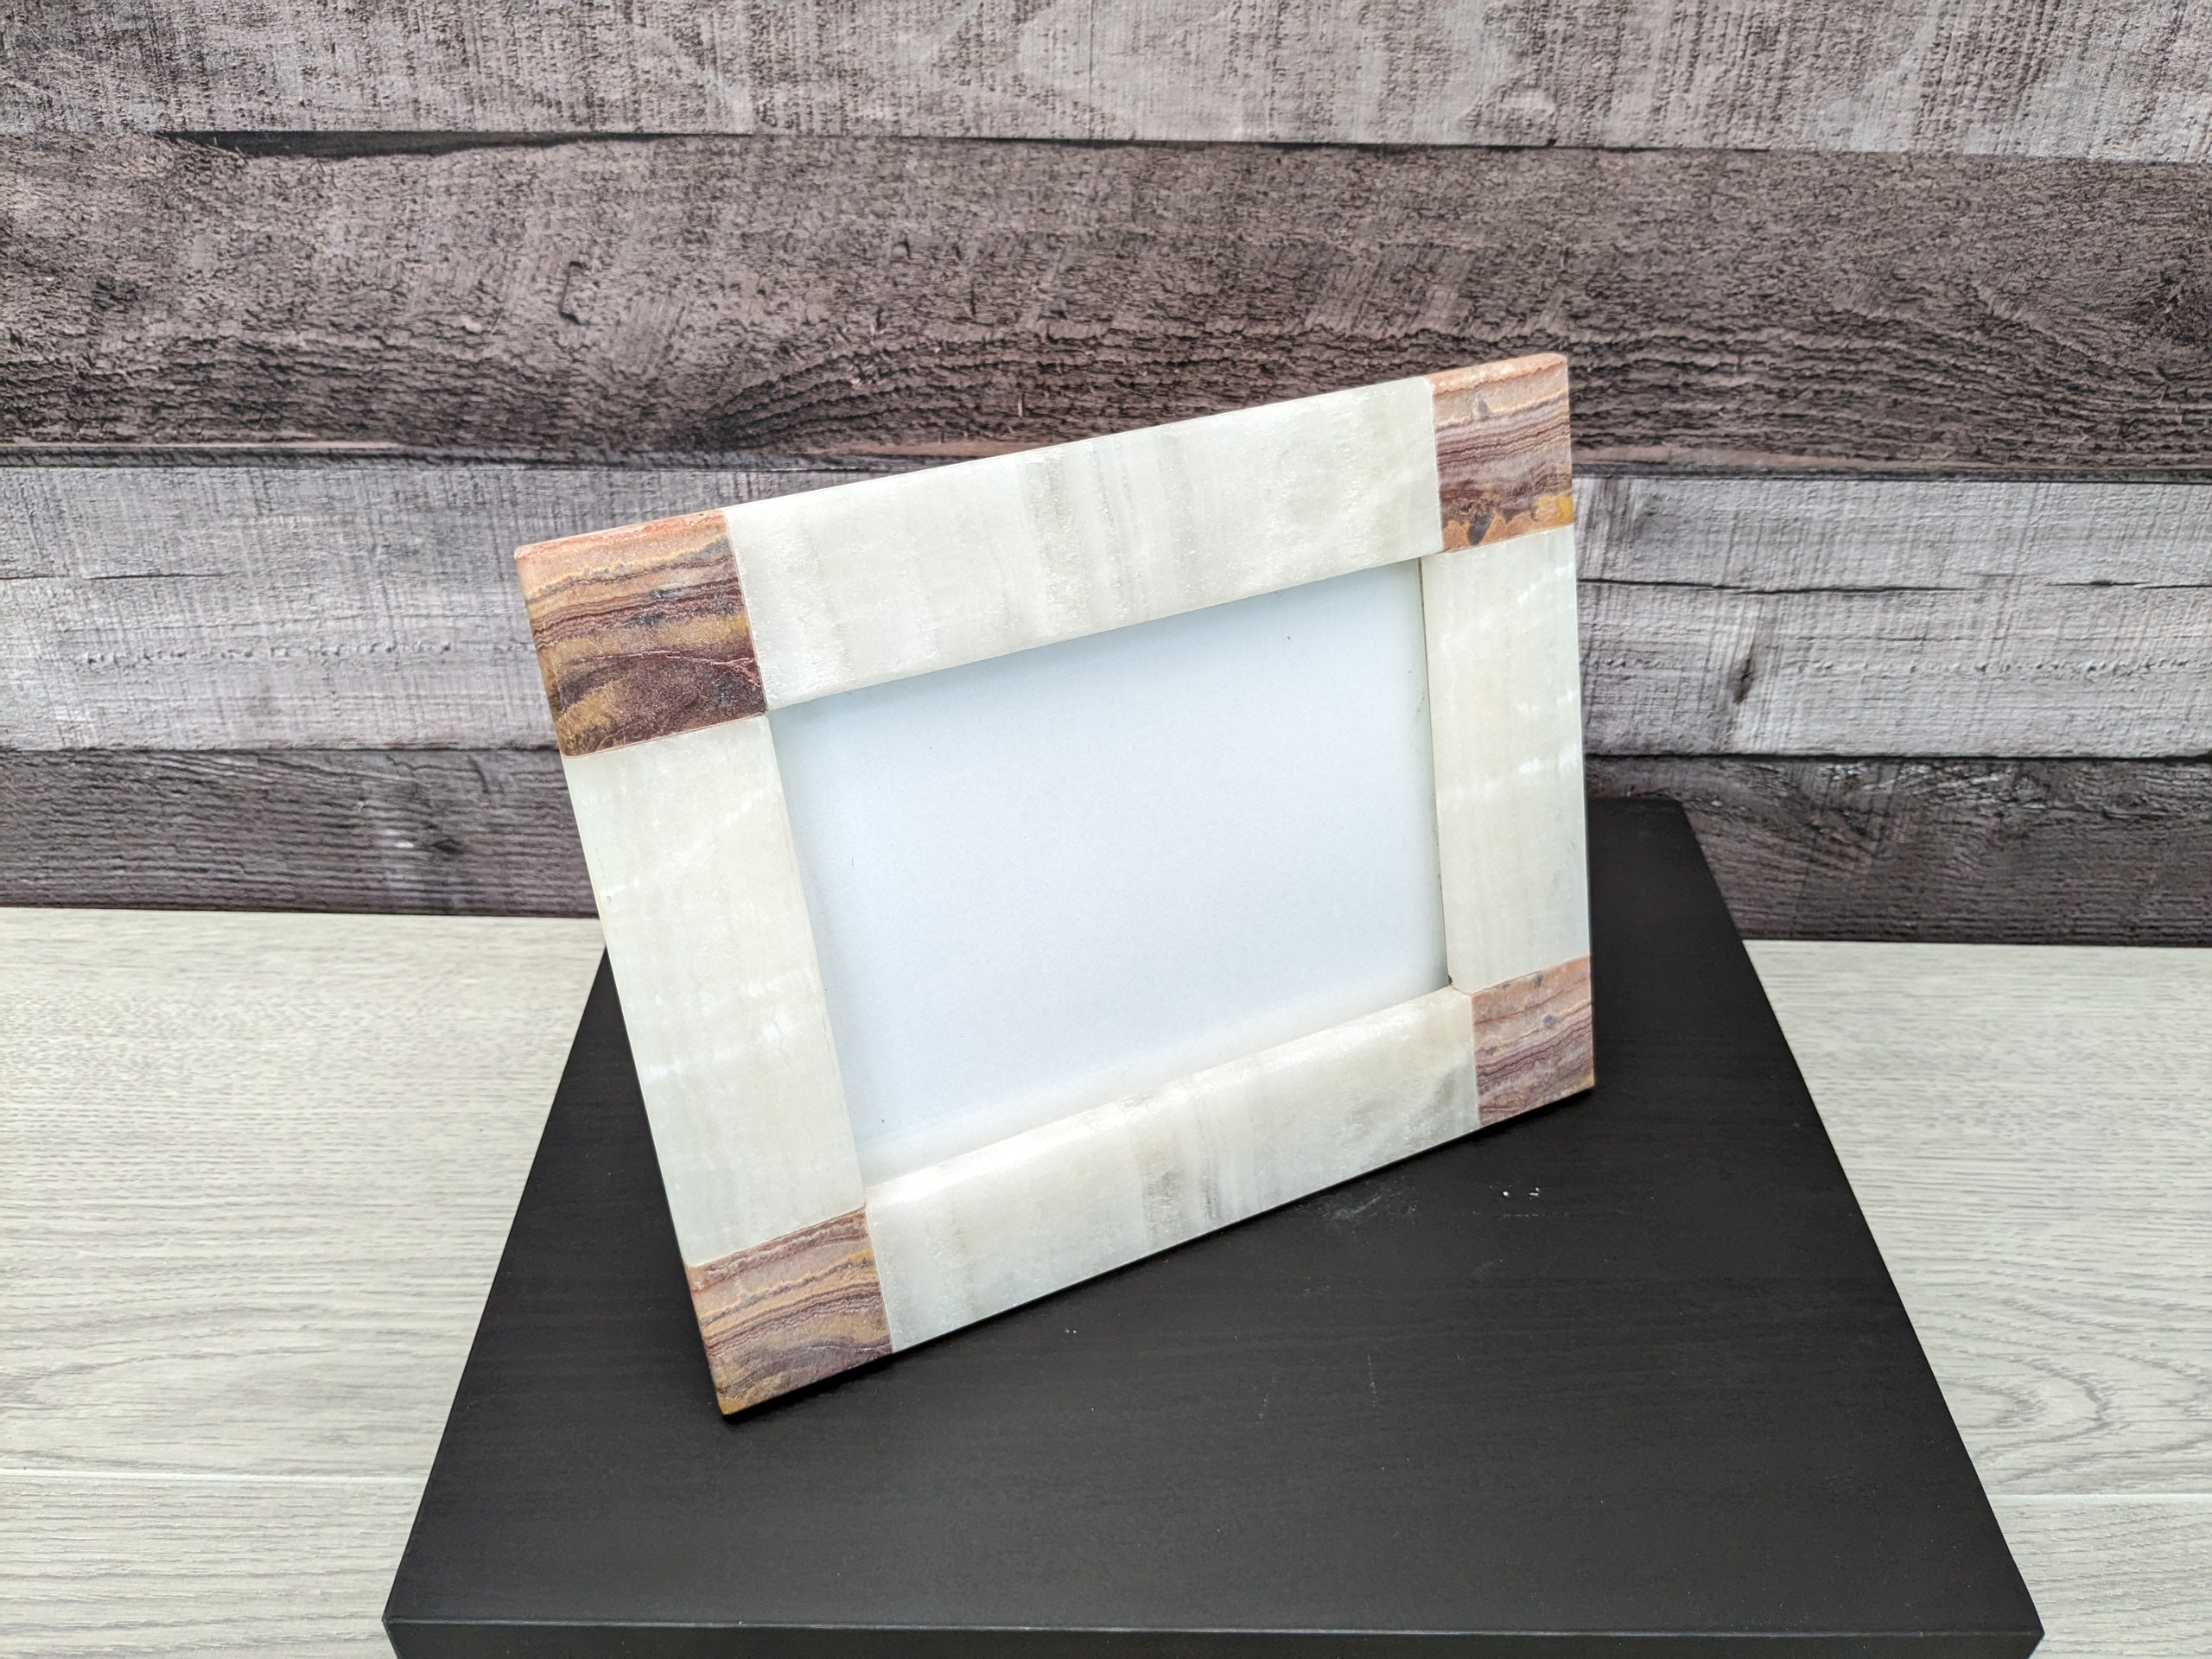 Beige and Brown Onyx and Travertine Stone Rectangle Frame with Glass. Handmade in Mexico. We package and ship from the USA. Buy now at www.felipeandgrace.com.